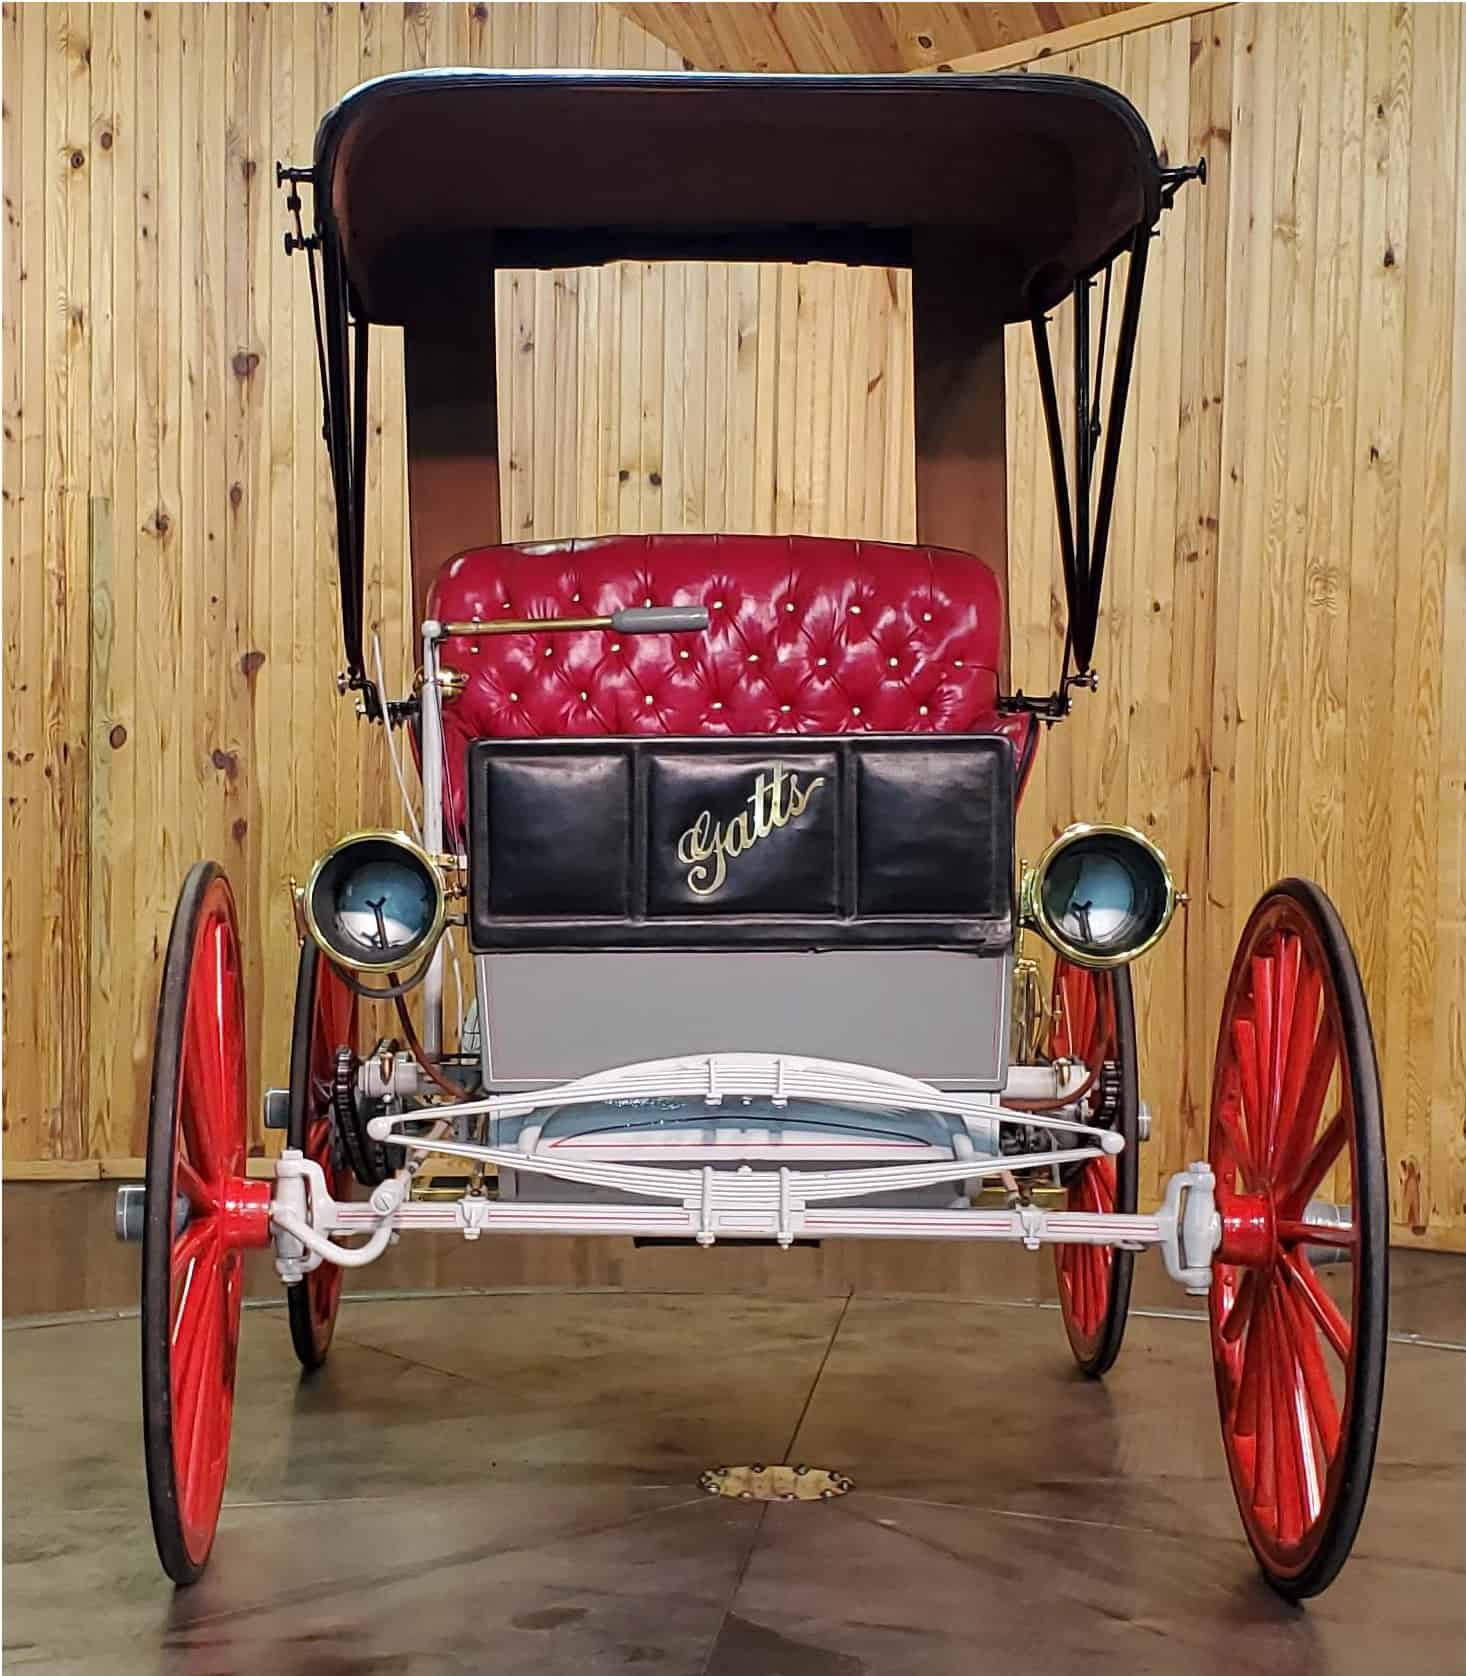 Gatts, Pick of the Day is only surviving 1905 Gatts, ClassicCars.com Journal